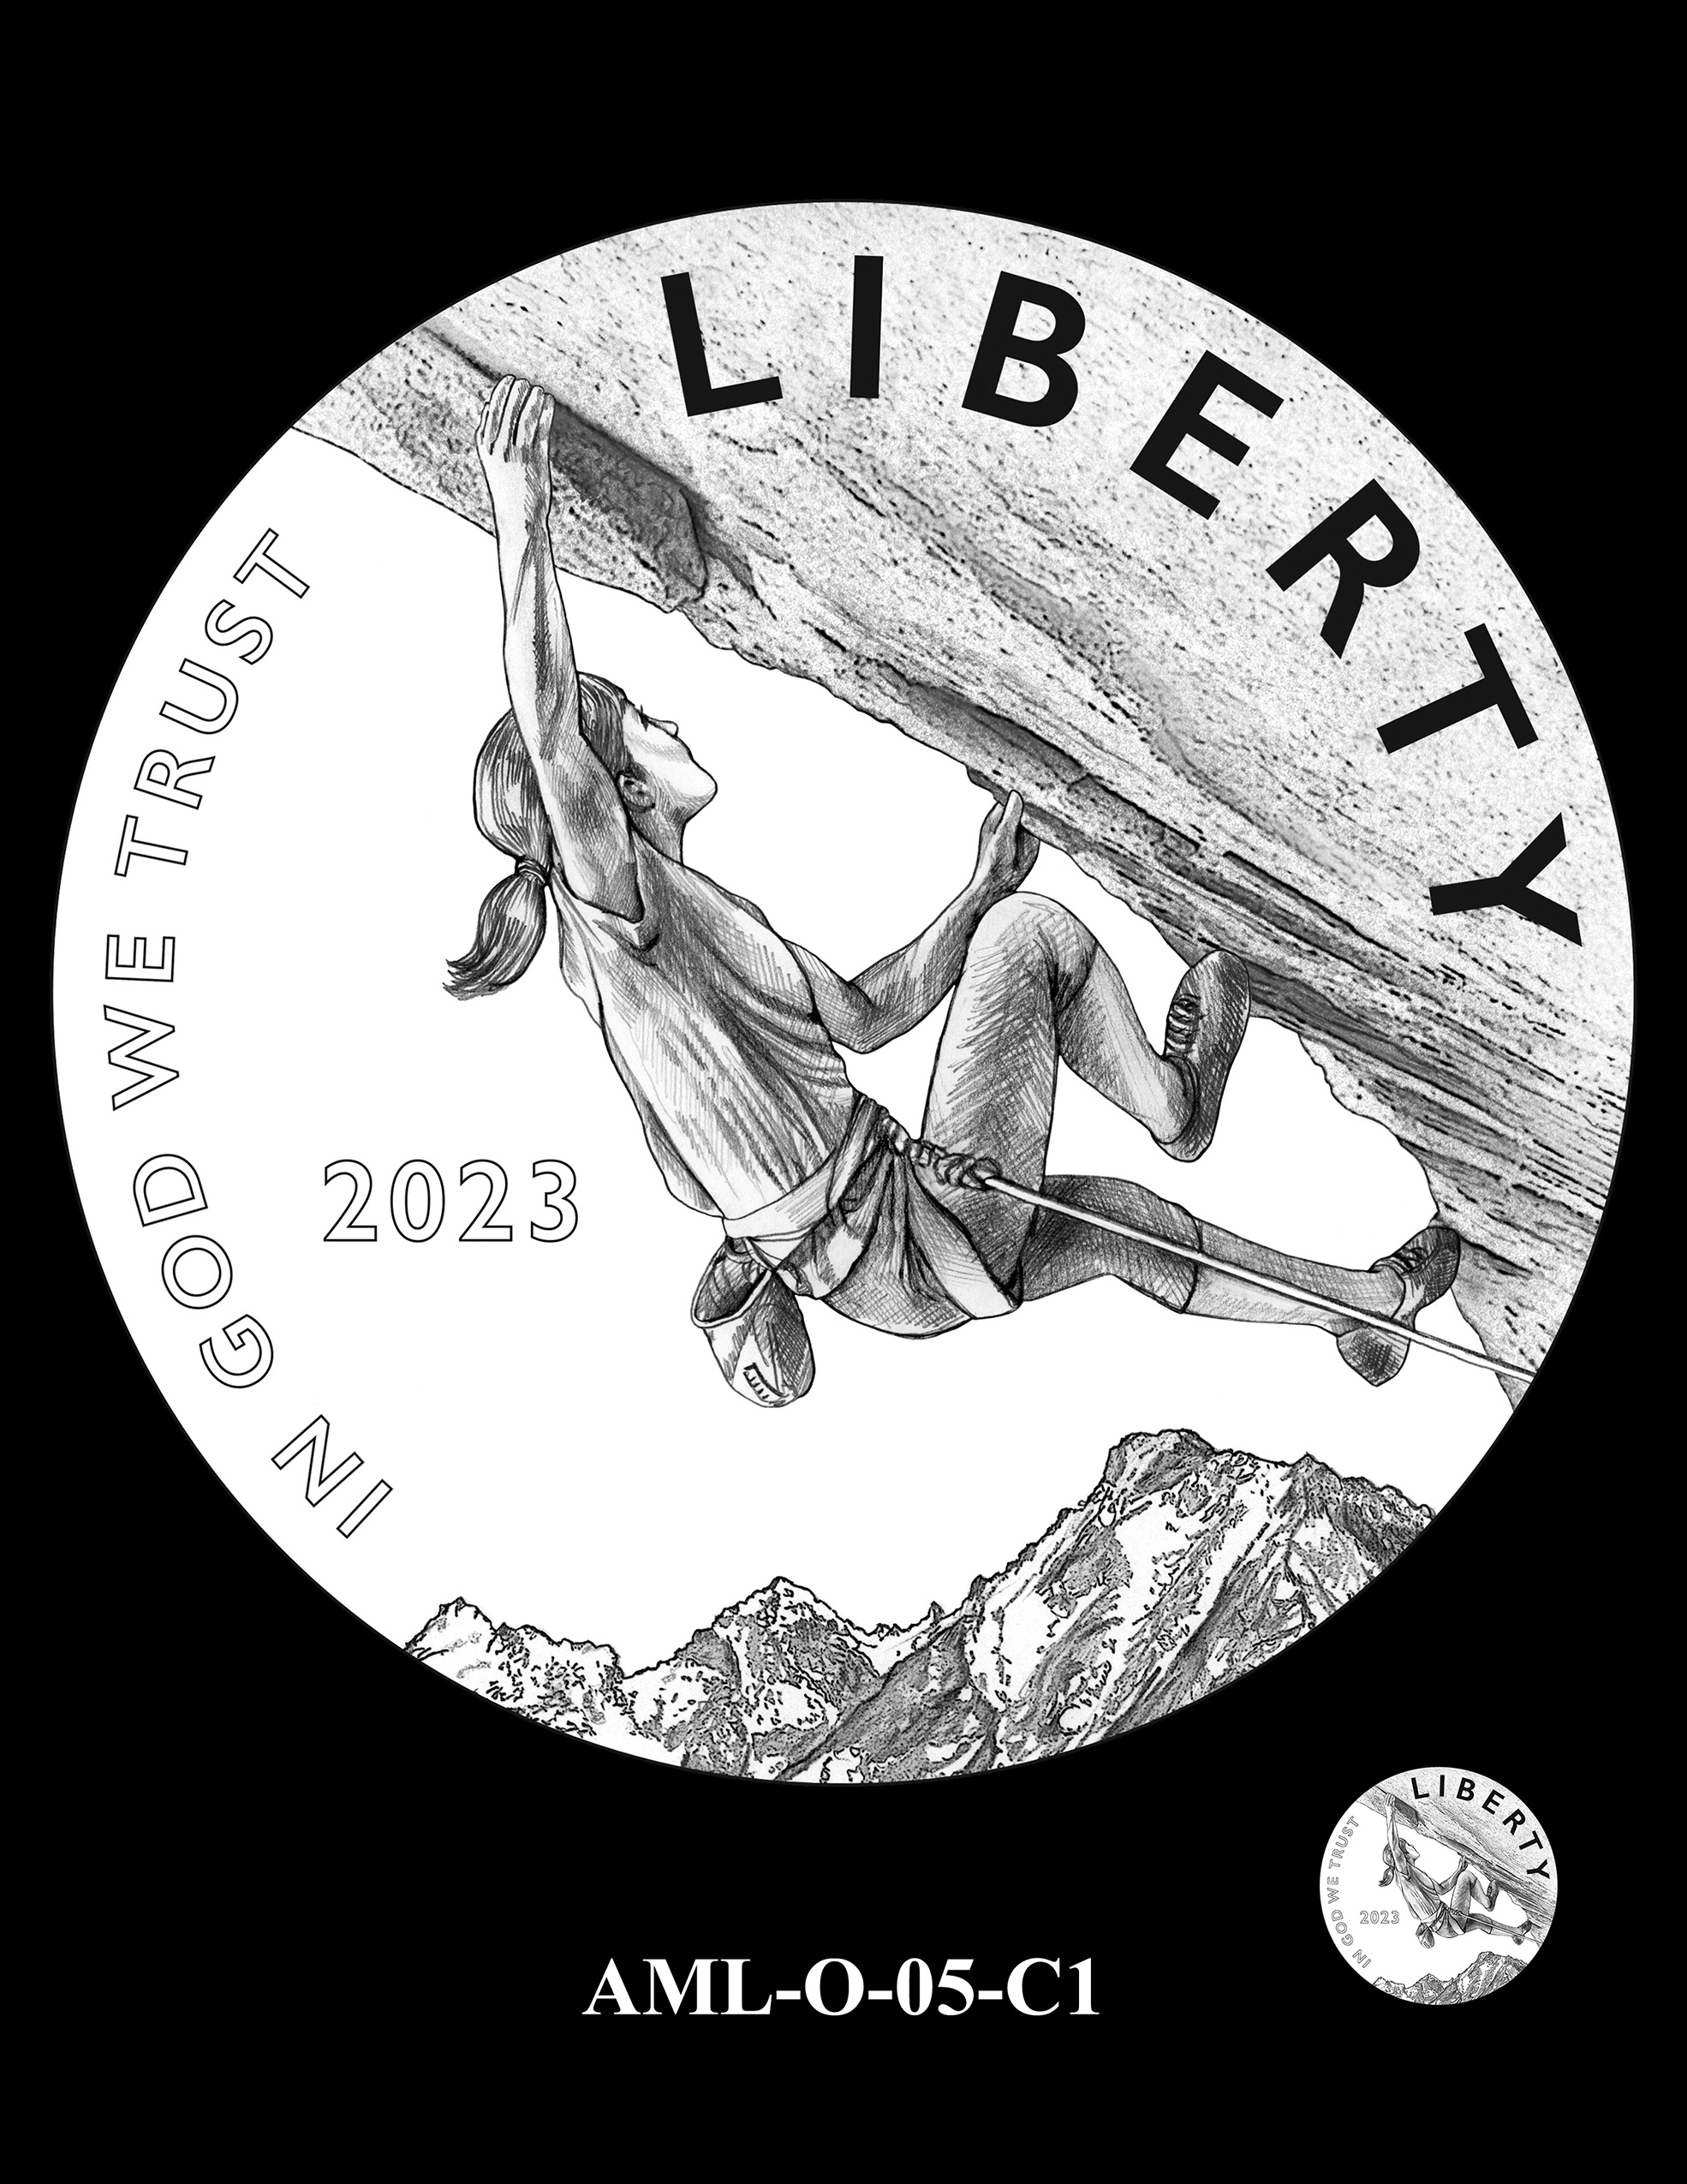 AML-O-05-C1 -- 2023 American Liberty High Relief 24k Gold and Silver Medal Program